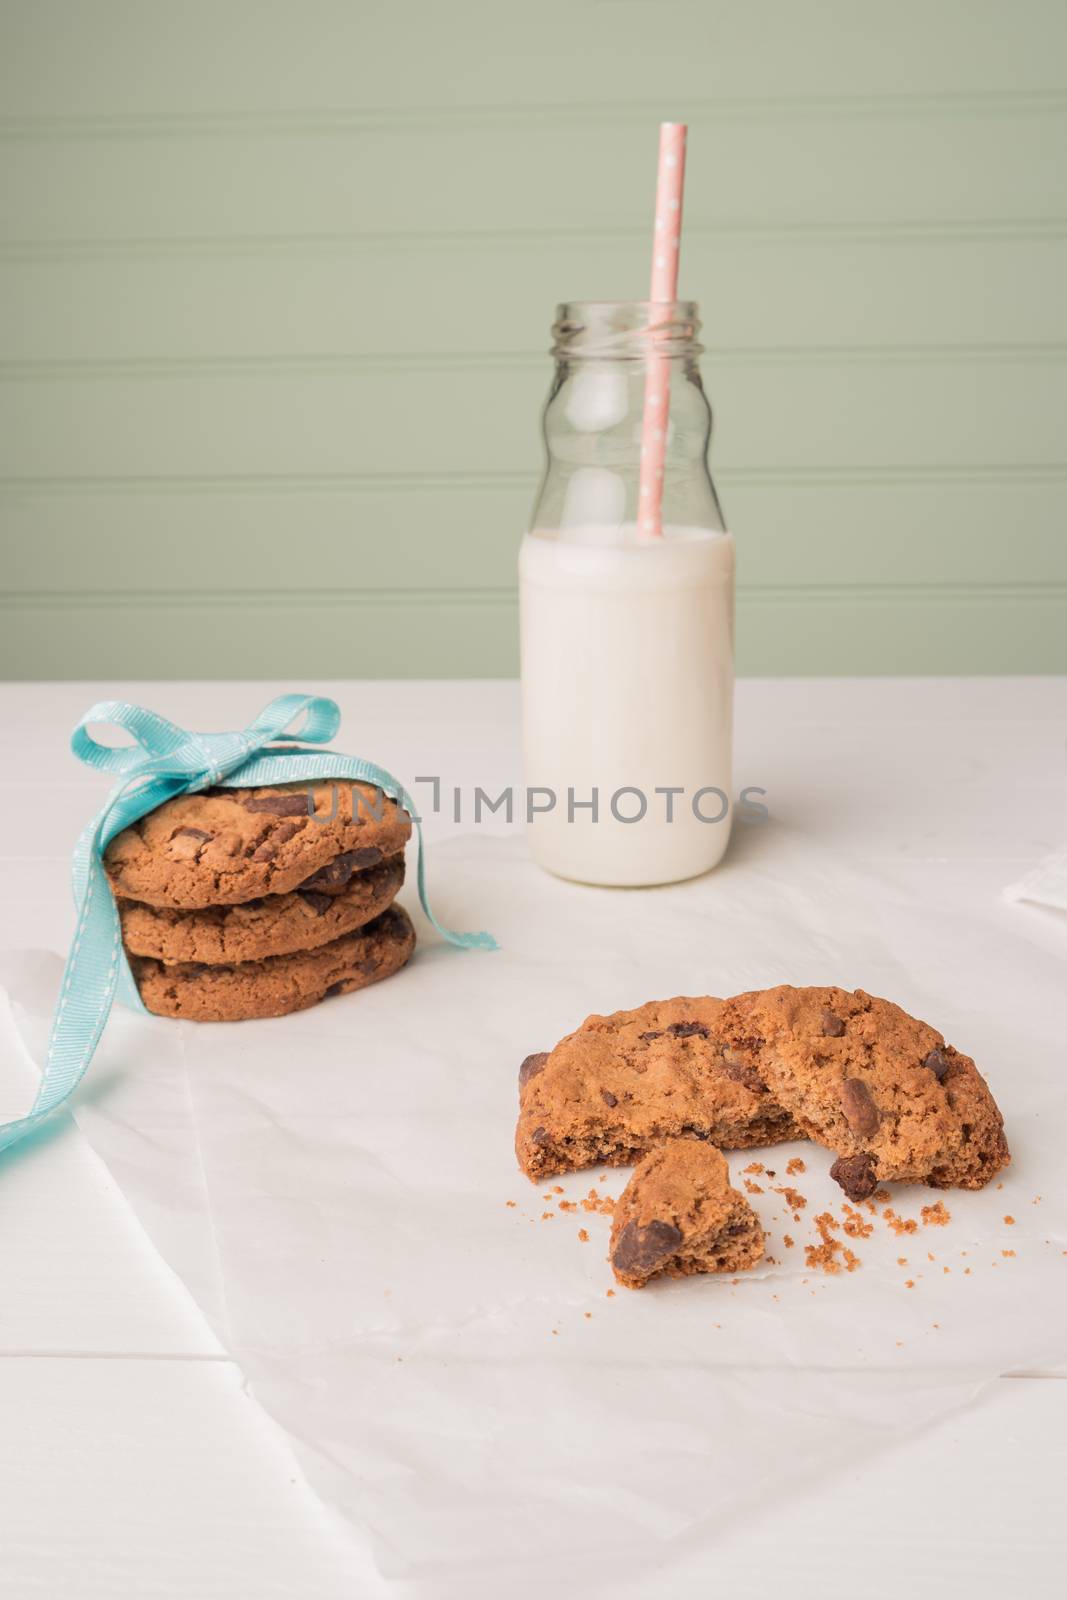 Chocolate chip cookies by AnaMarques